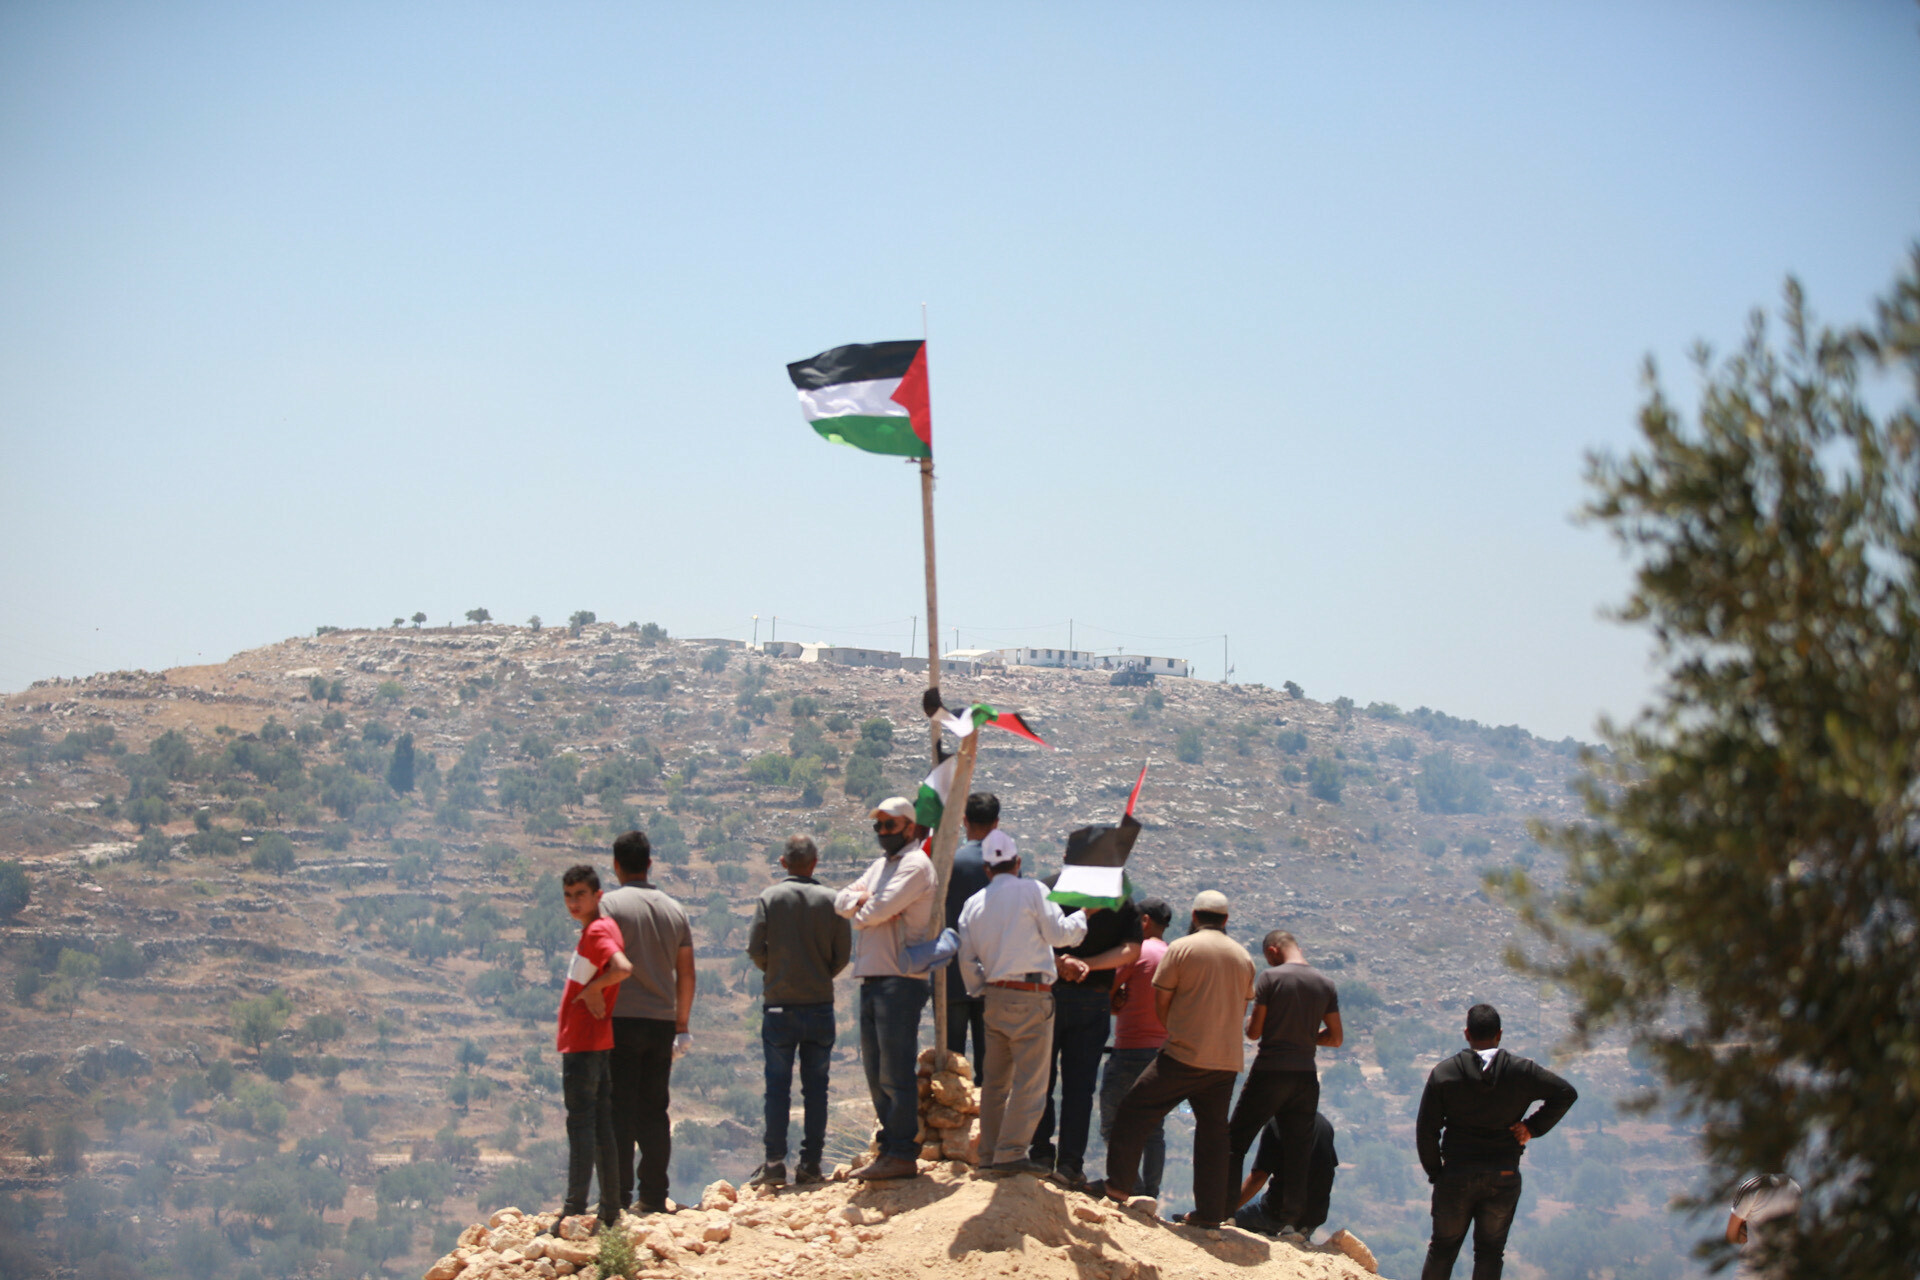 Palestinians' protest against Jewish settlements in West Bank